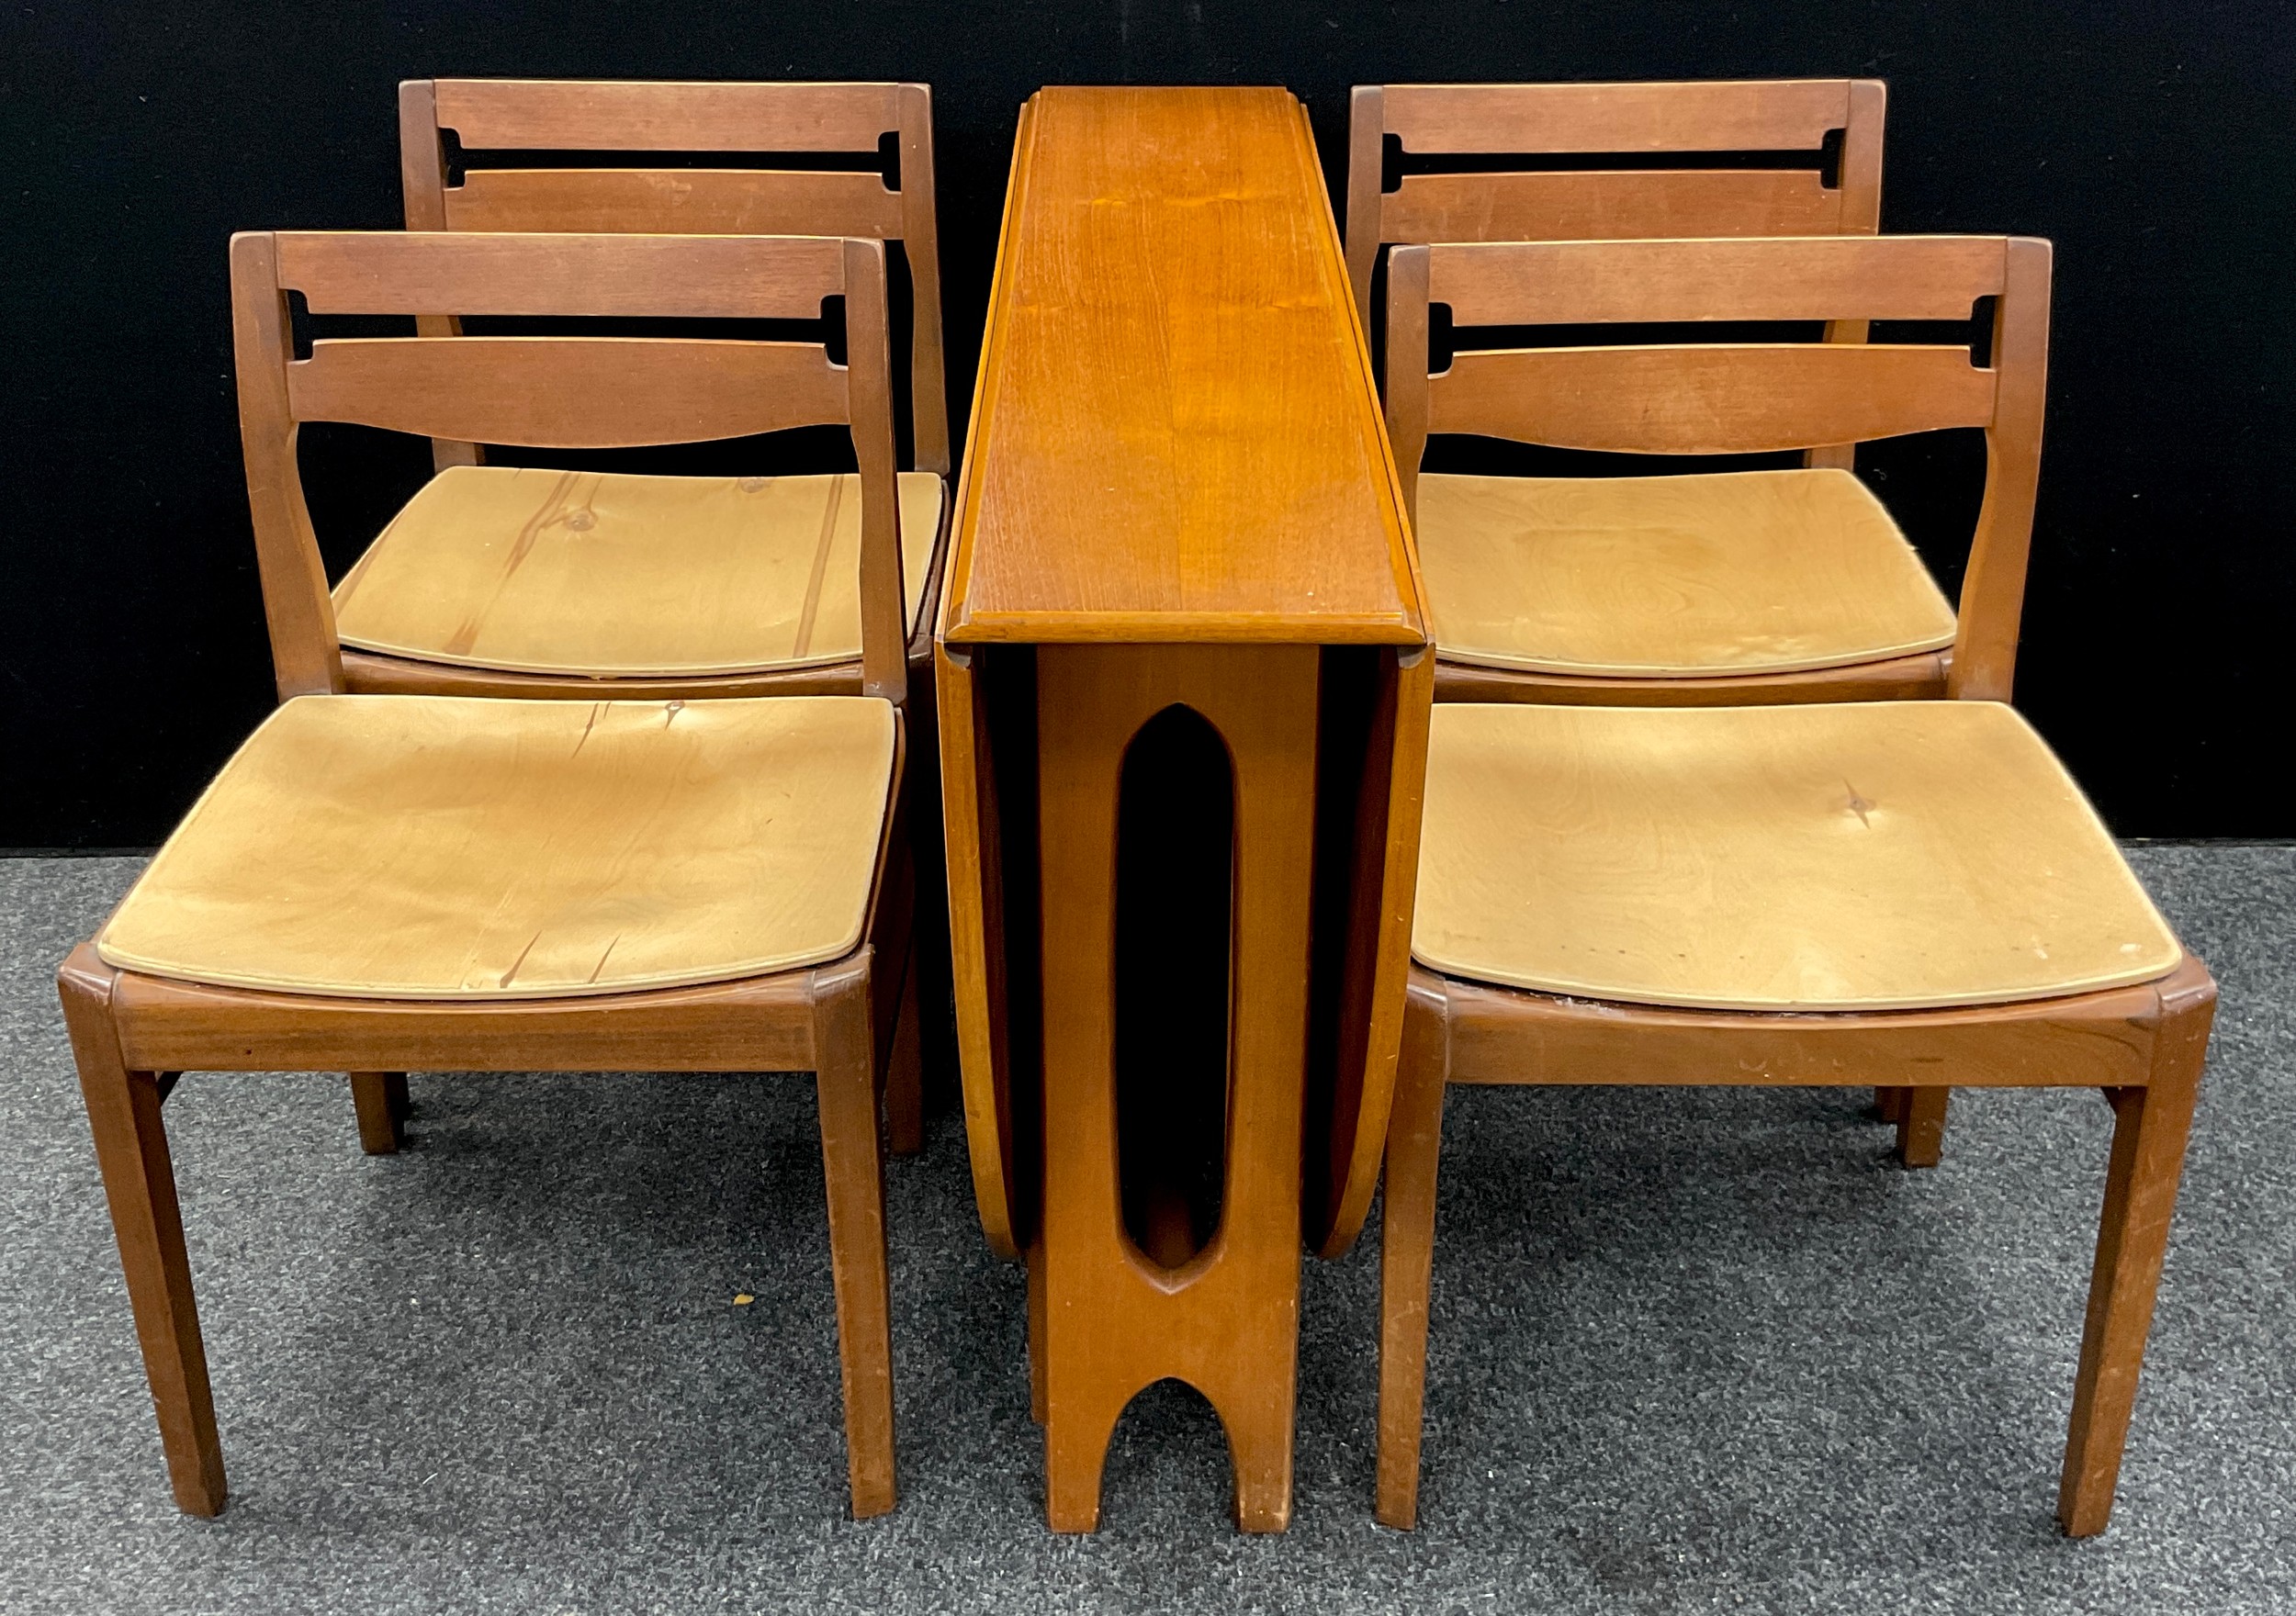 A Nathan teak drop-leaf dining table with matching set of four mid century design chairs, (5).